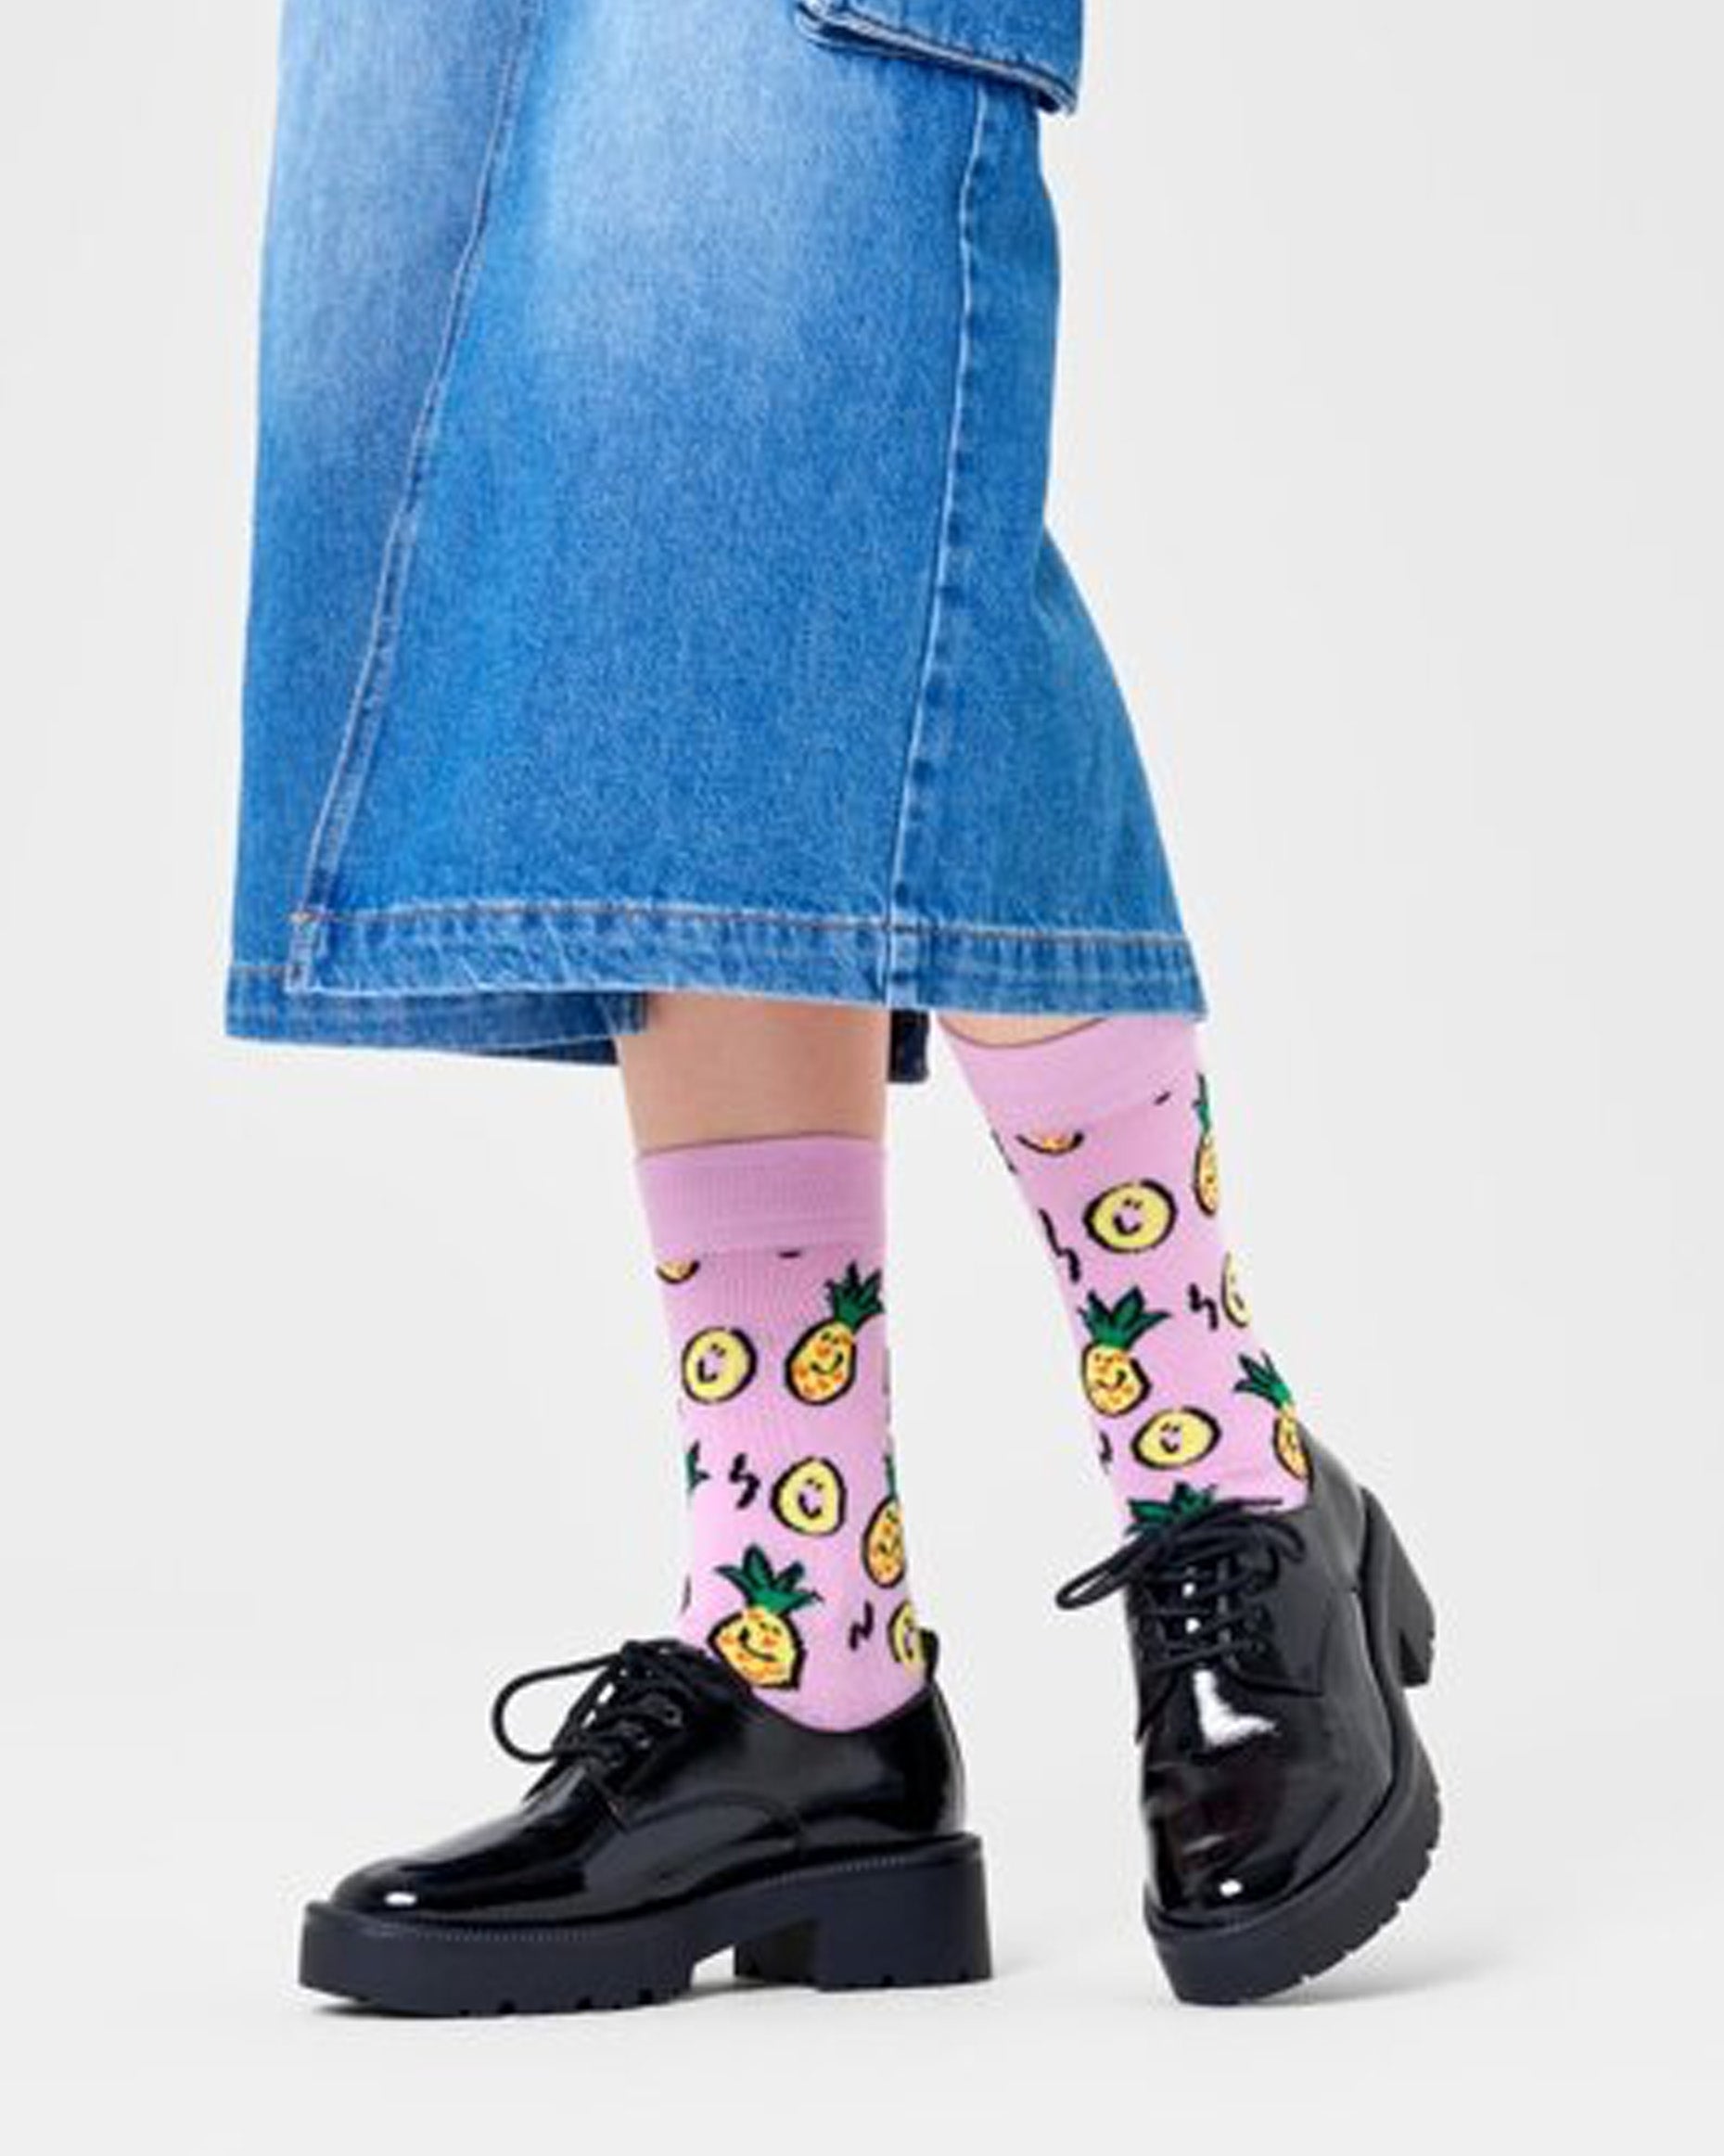 Happy Socks P000718 Pineapple Sock - Light lilac cotton crew length ankle socks with an all over pattern of smiling cartoon pineapples in shades of yellow, green and black. Worn with denim skirt and black chunky loafers.